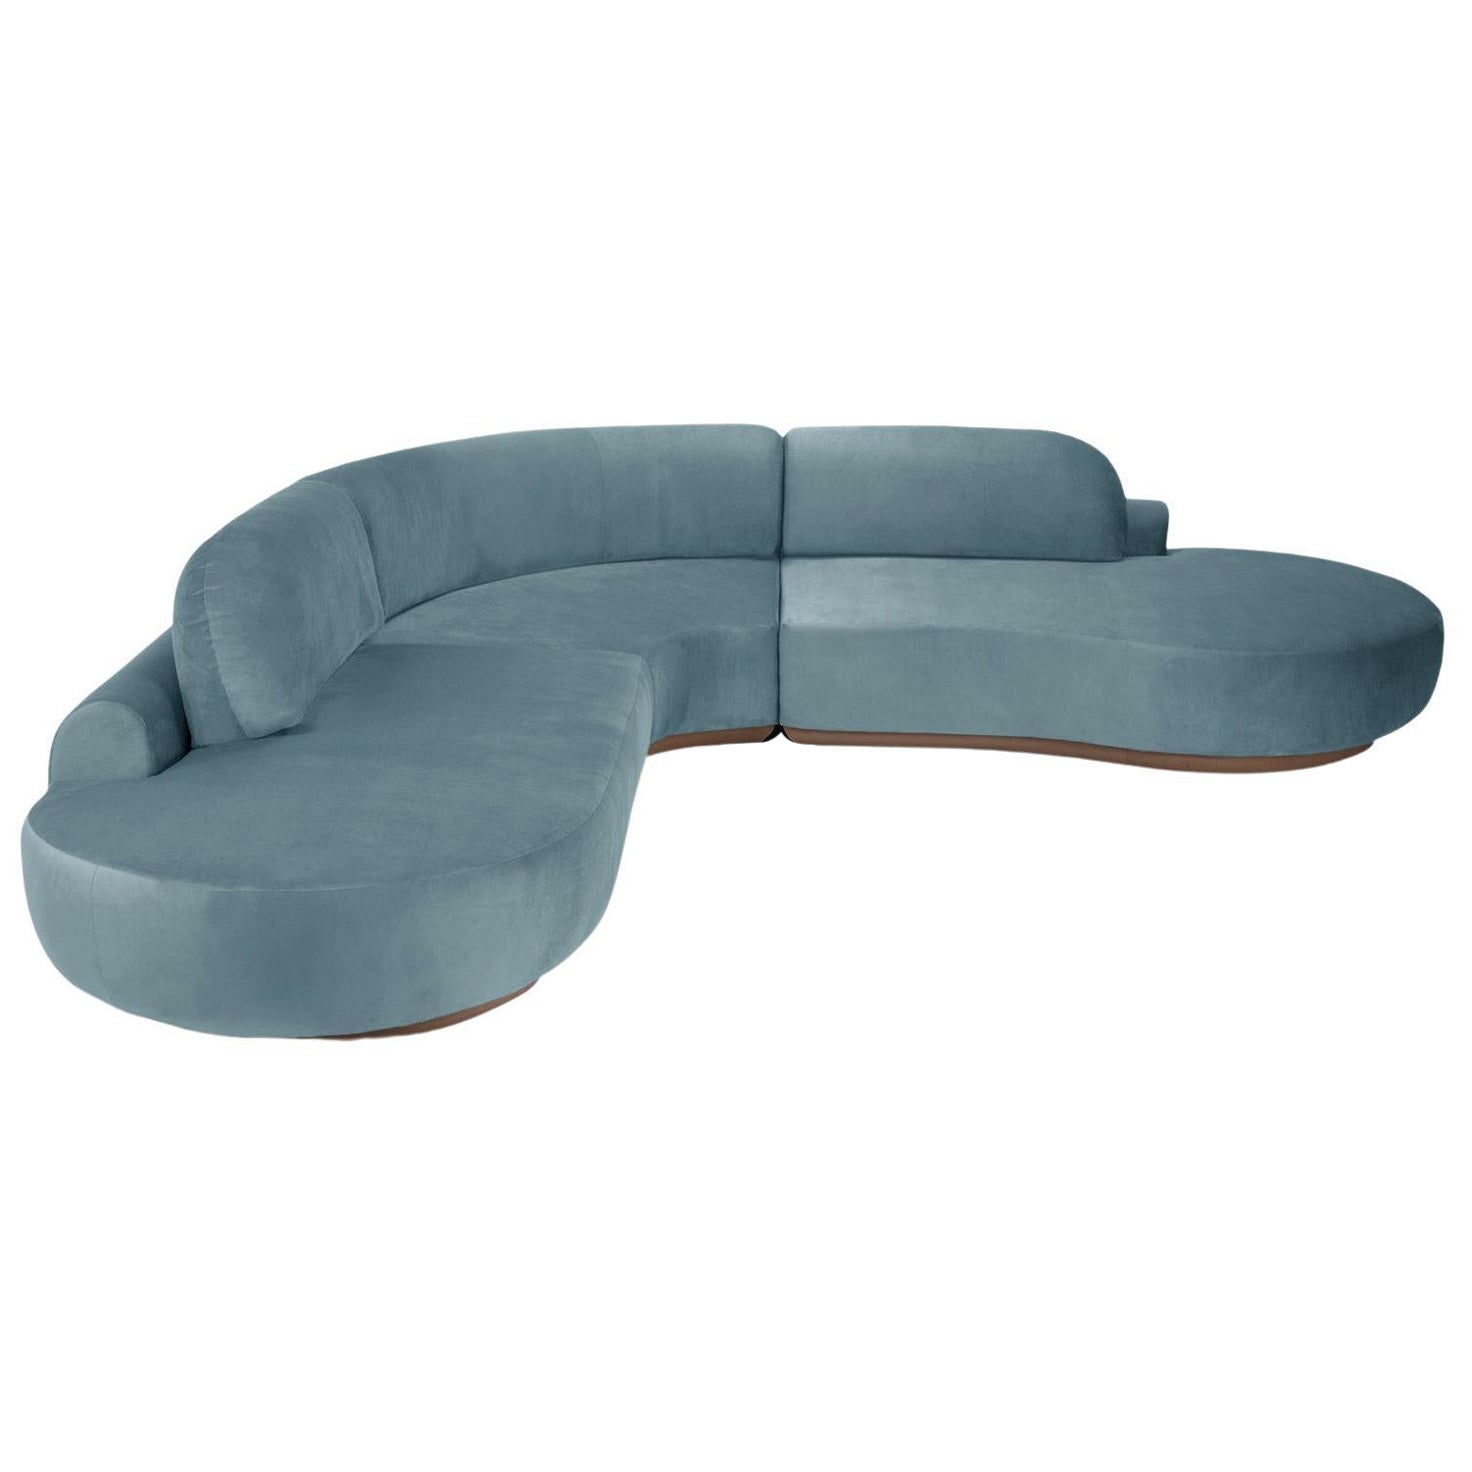 Naked Curved Sectional Sofa, 3 Piece with Beech Ash-056-5 and Paris Dark Blue For Sale